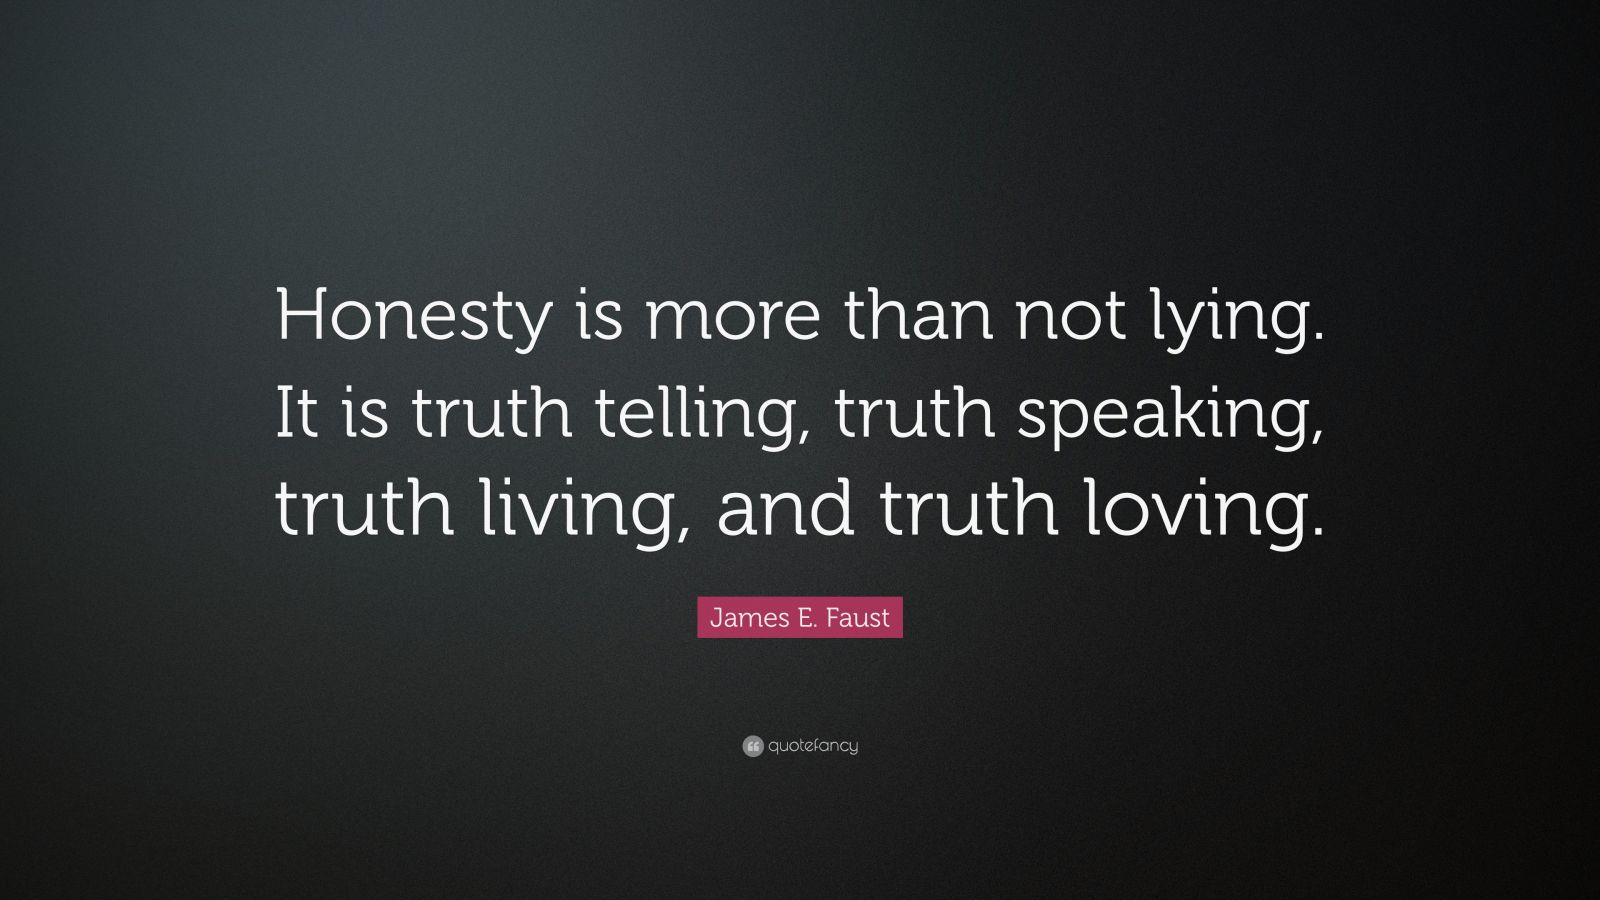 6 Quotes About Telling The Truth